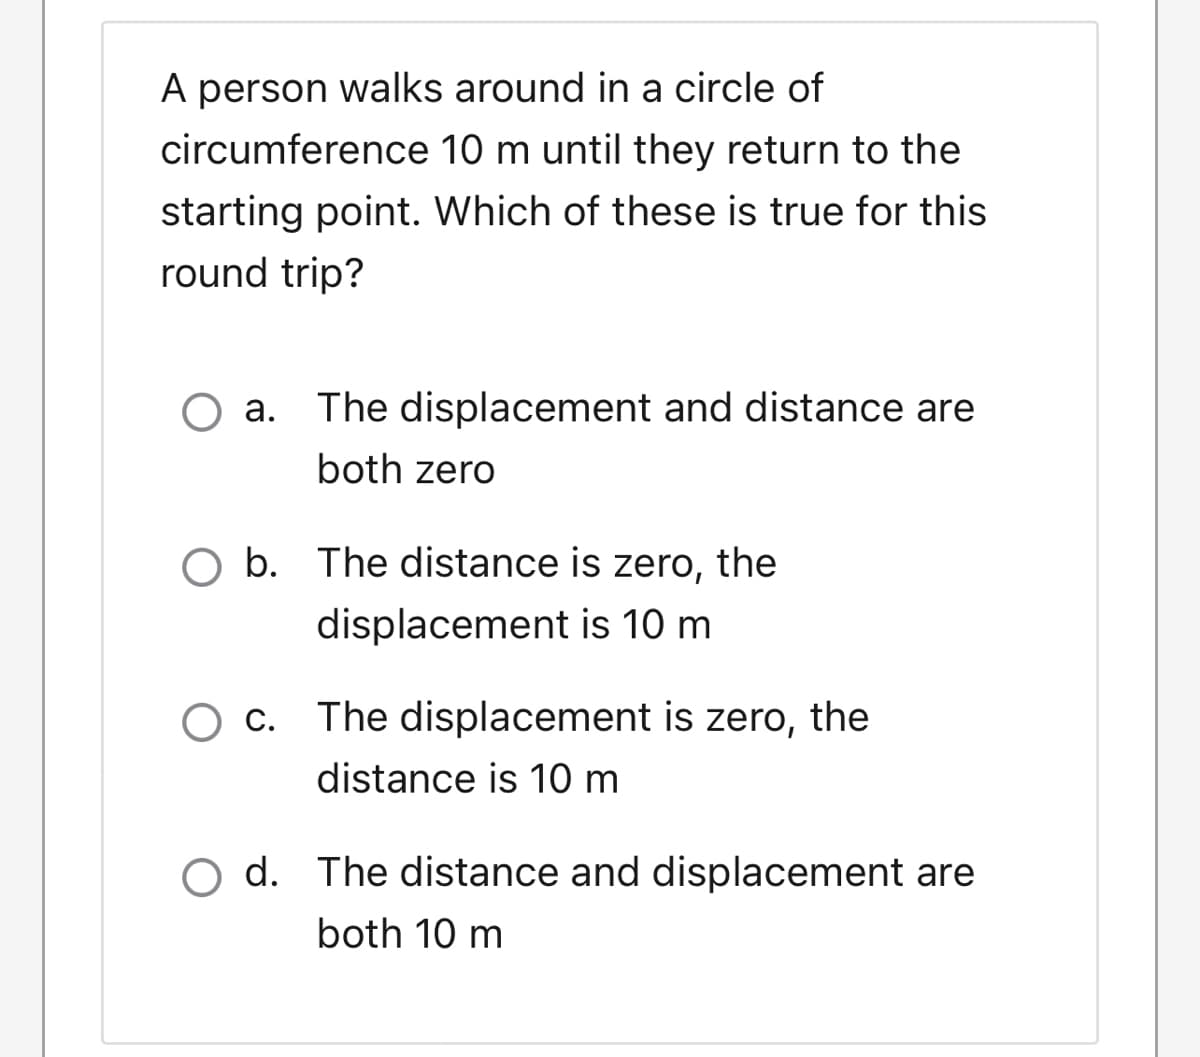 A person walks around in a circle of
circumference 10 m until they return to the
starting point. Which of these is true for this
round trip?
O a. The displacement and distance are
both zero
O b. The distance is zero, the
displacement is 10 m
O c. The displacement is zero, the
distance is 10 m
O d. The distance and displacement are
both 10 m
